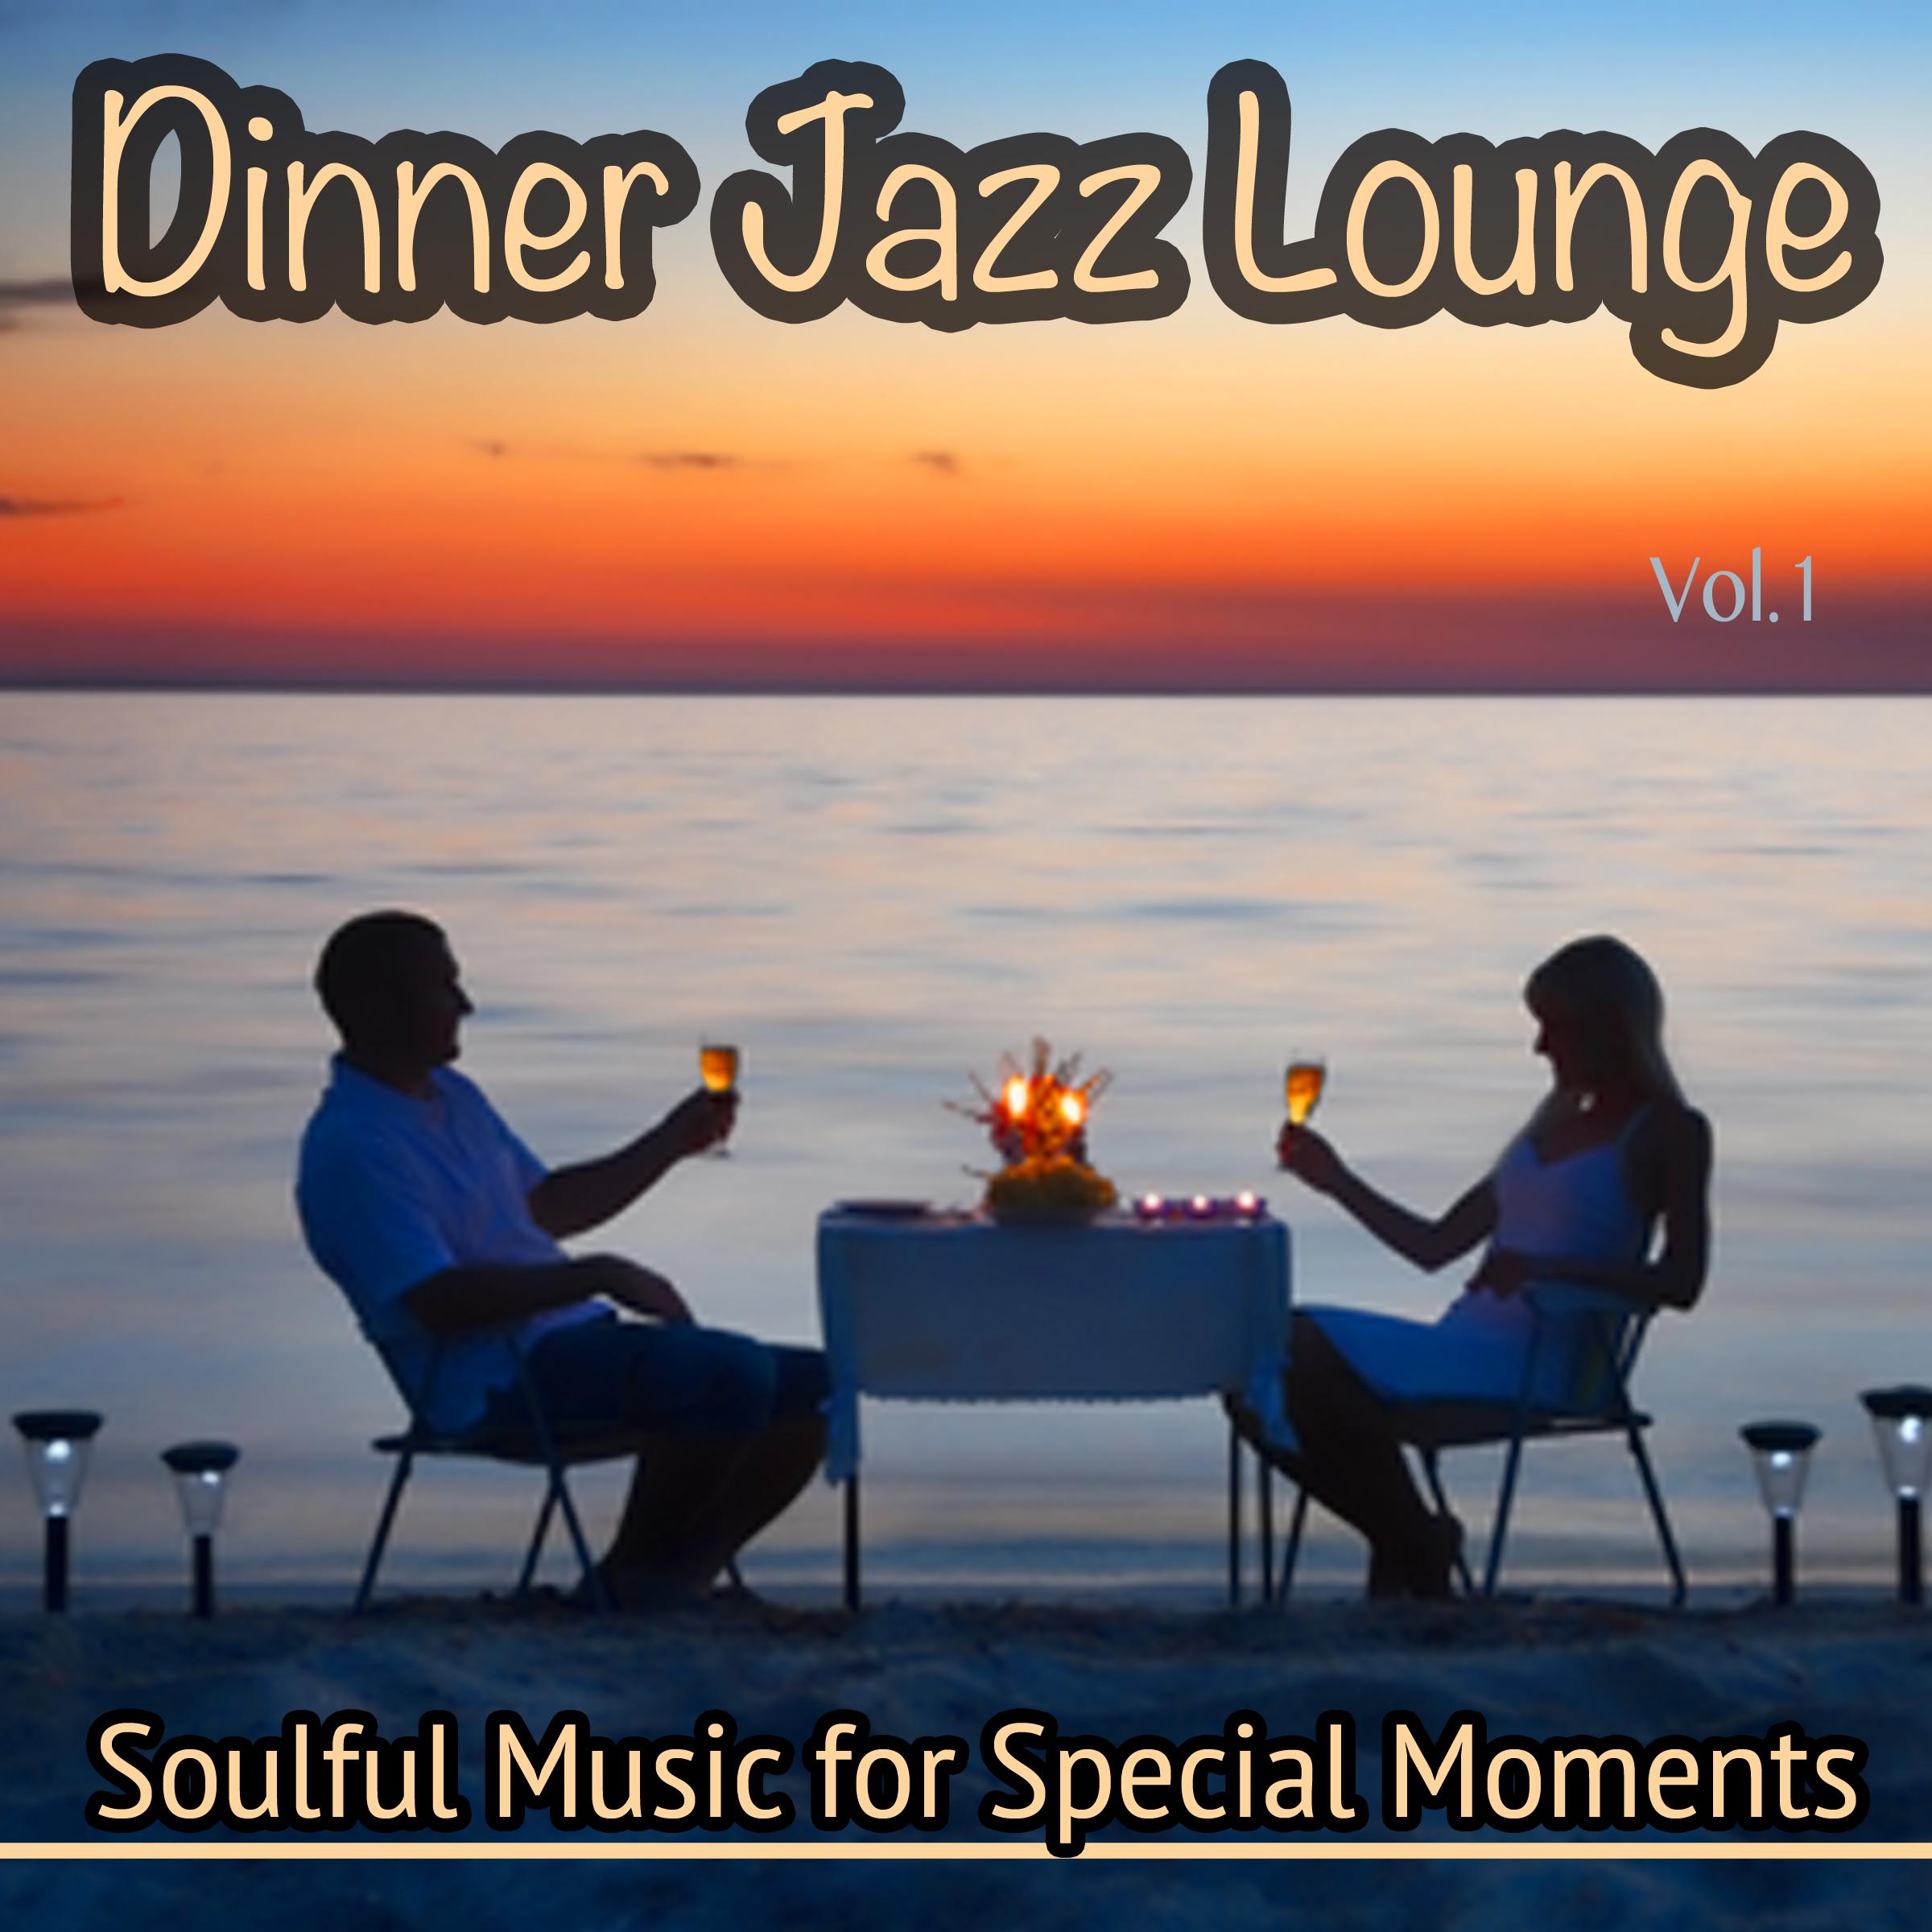 Dinner Jazz Lounge, Vol. 1 - Soulfoul Music for Special Moments